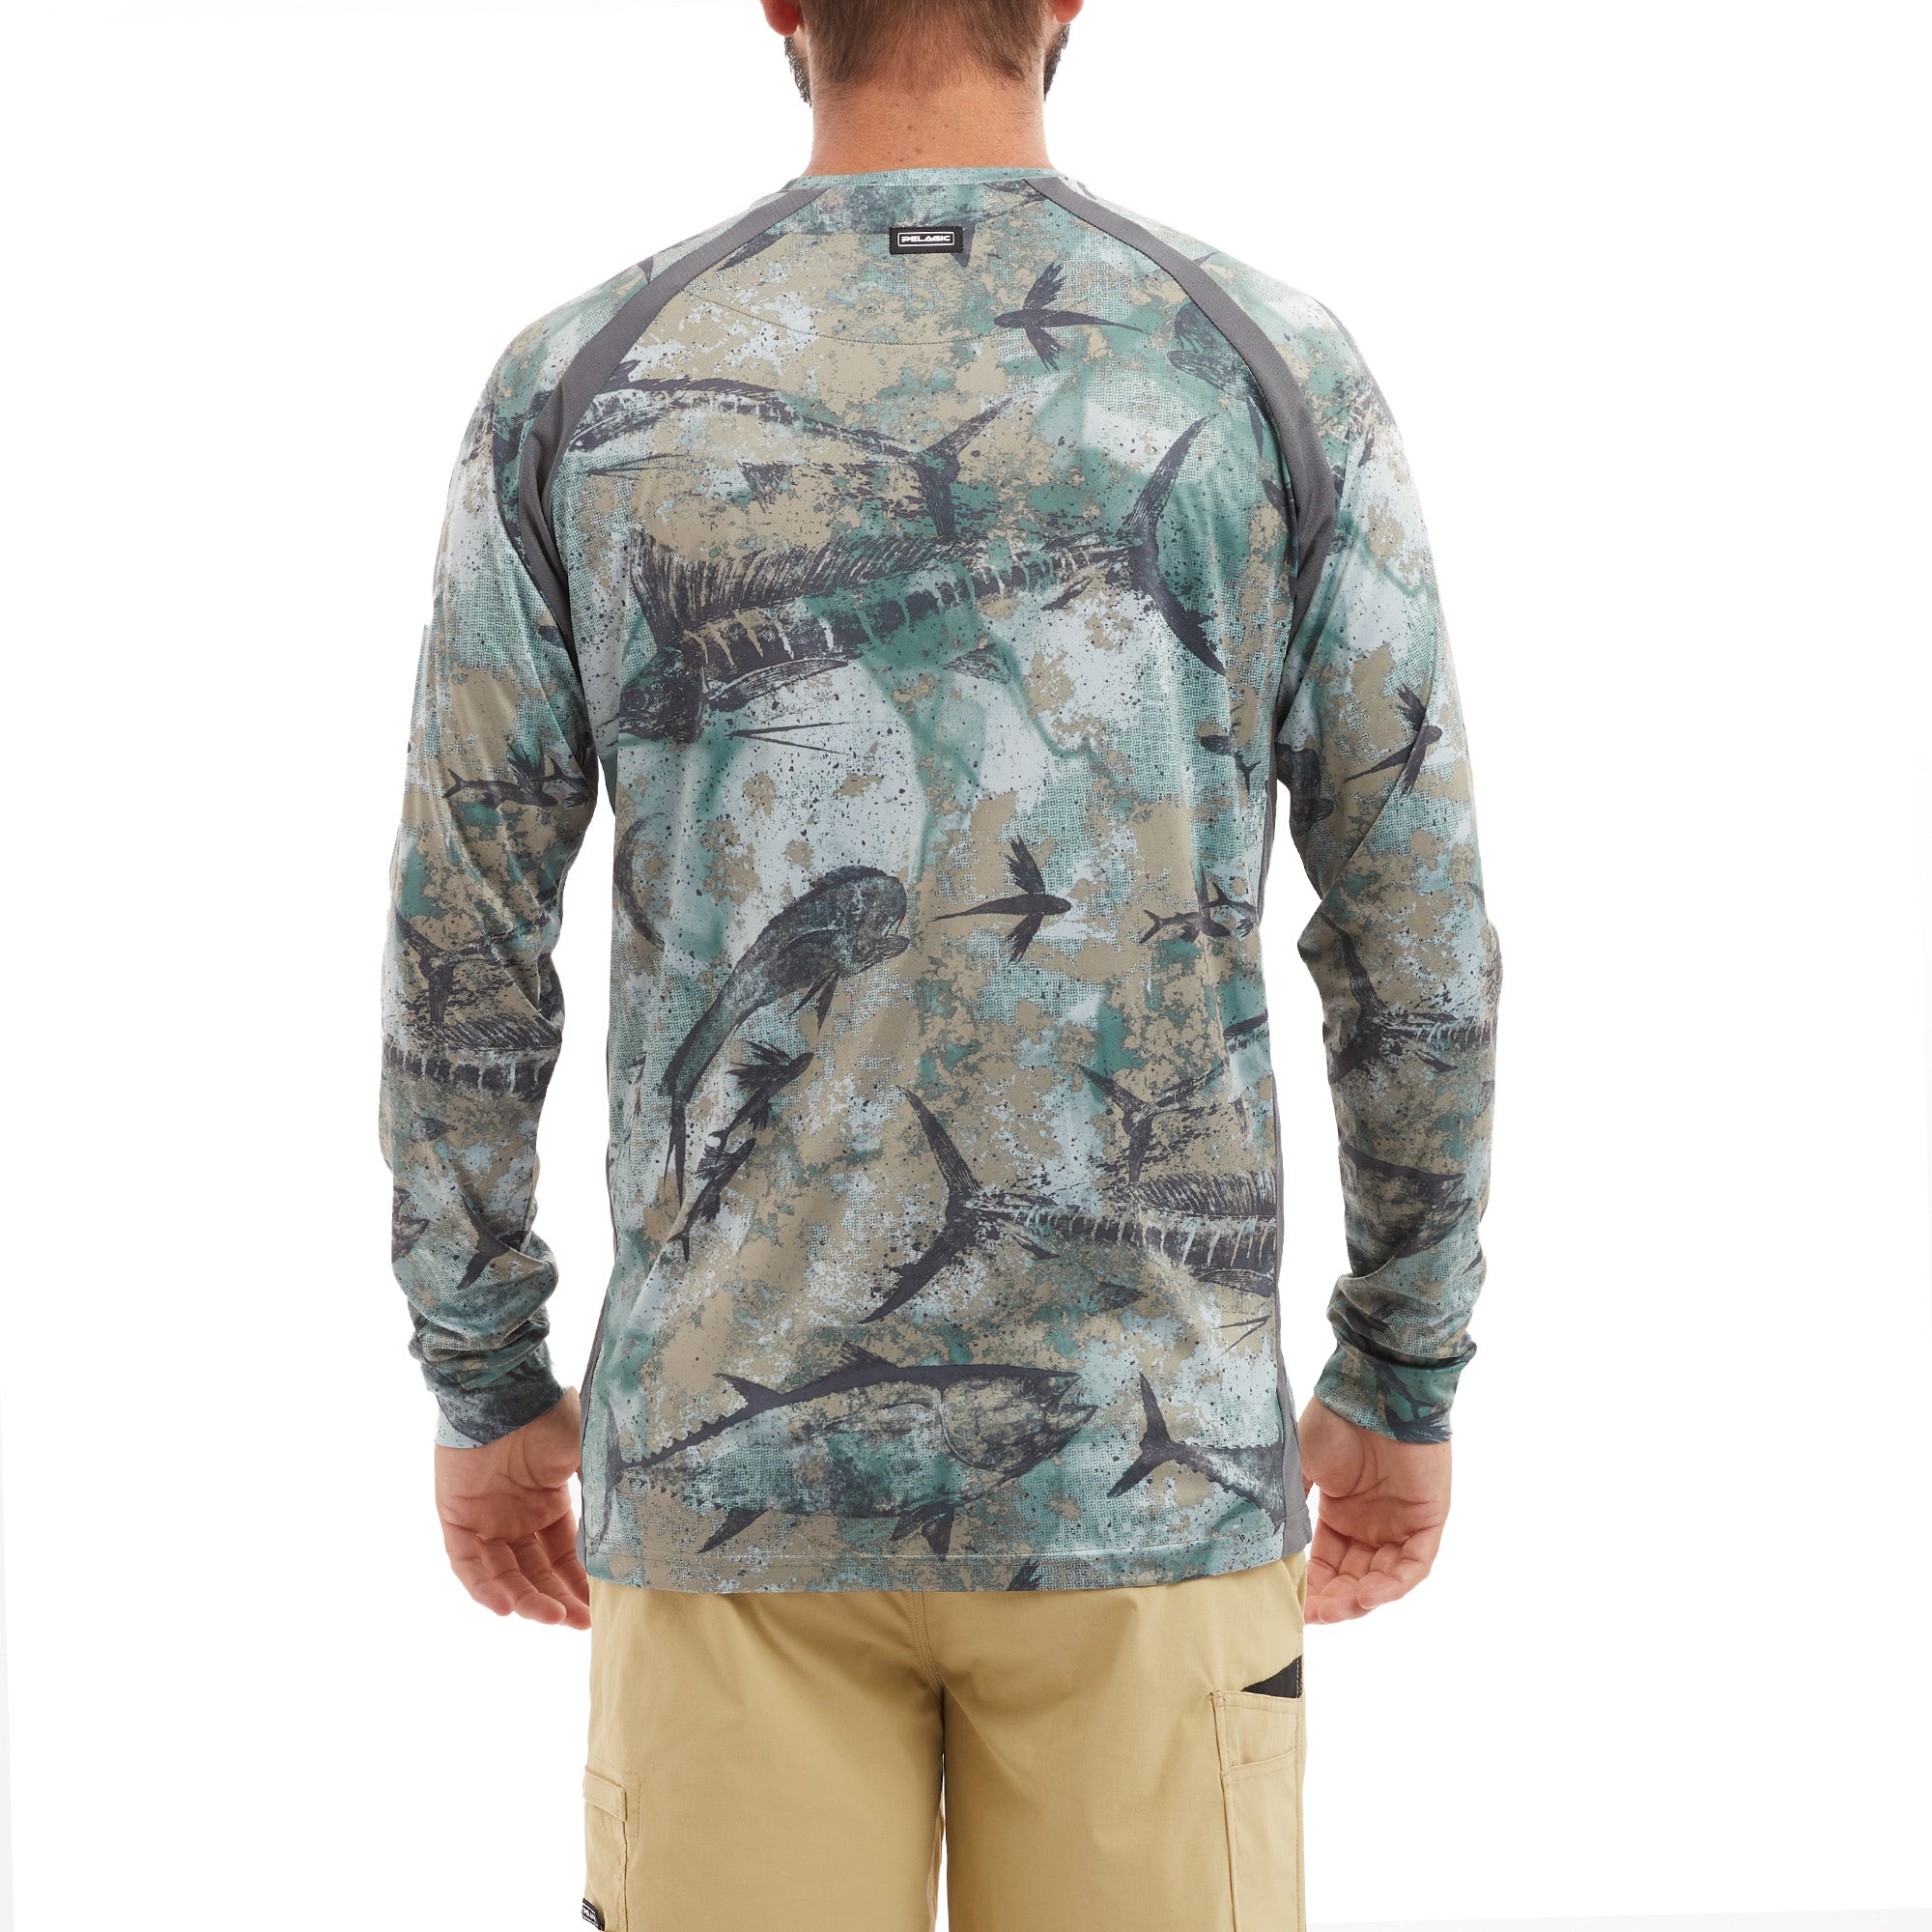 Huk Youth Pursuit Long Sleeve Shirt Camo Vented, India